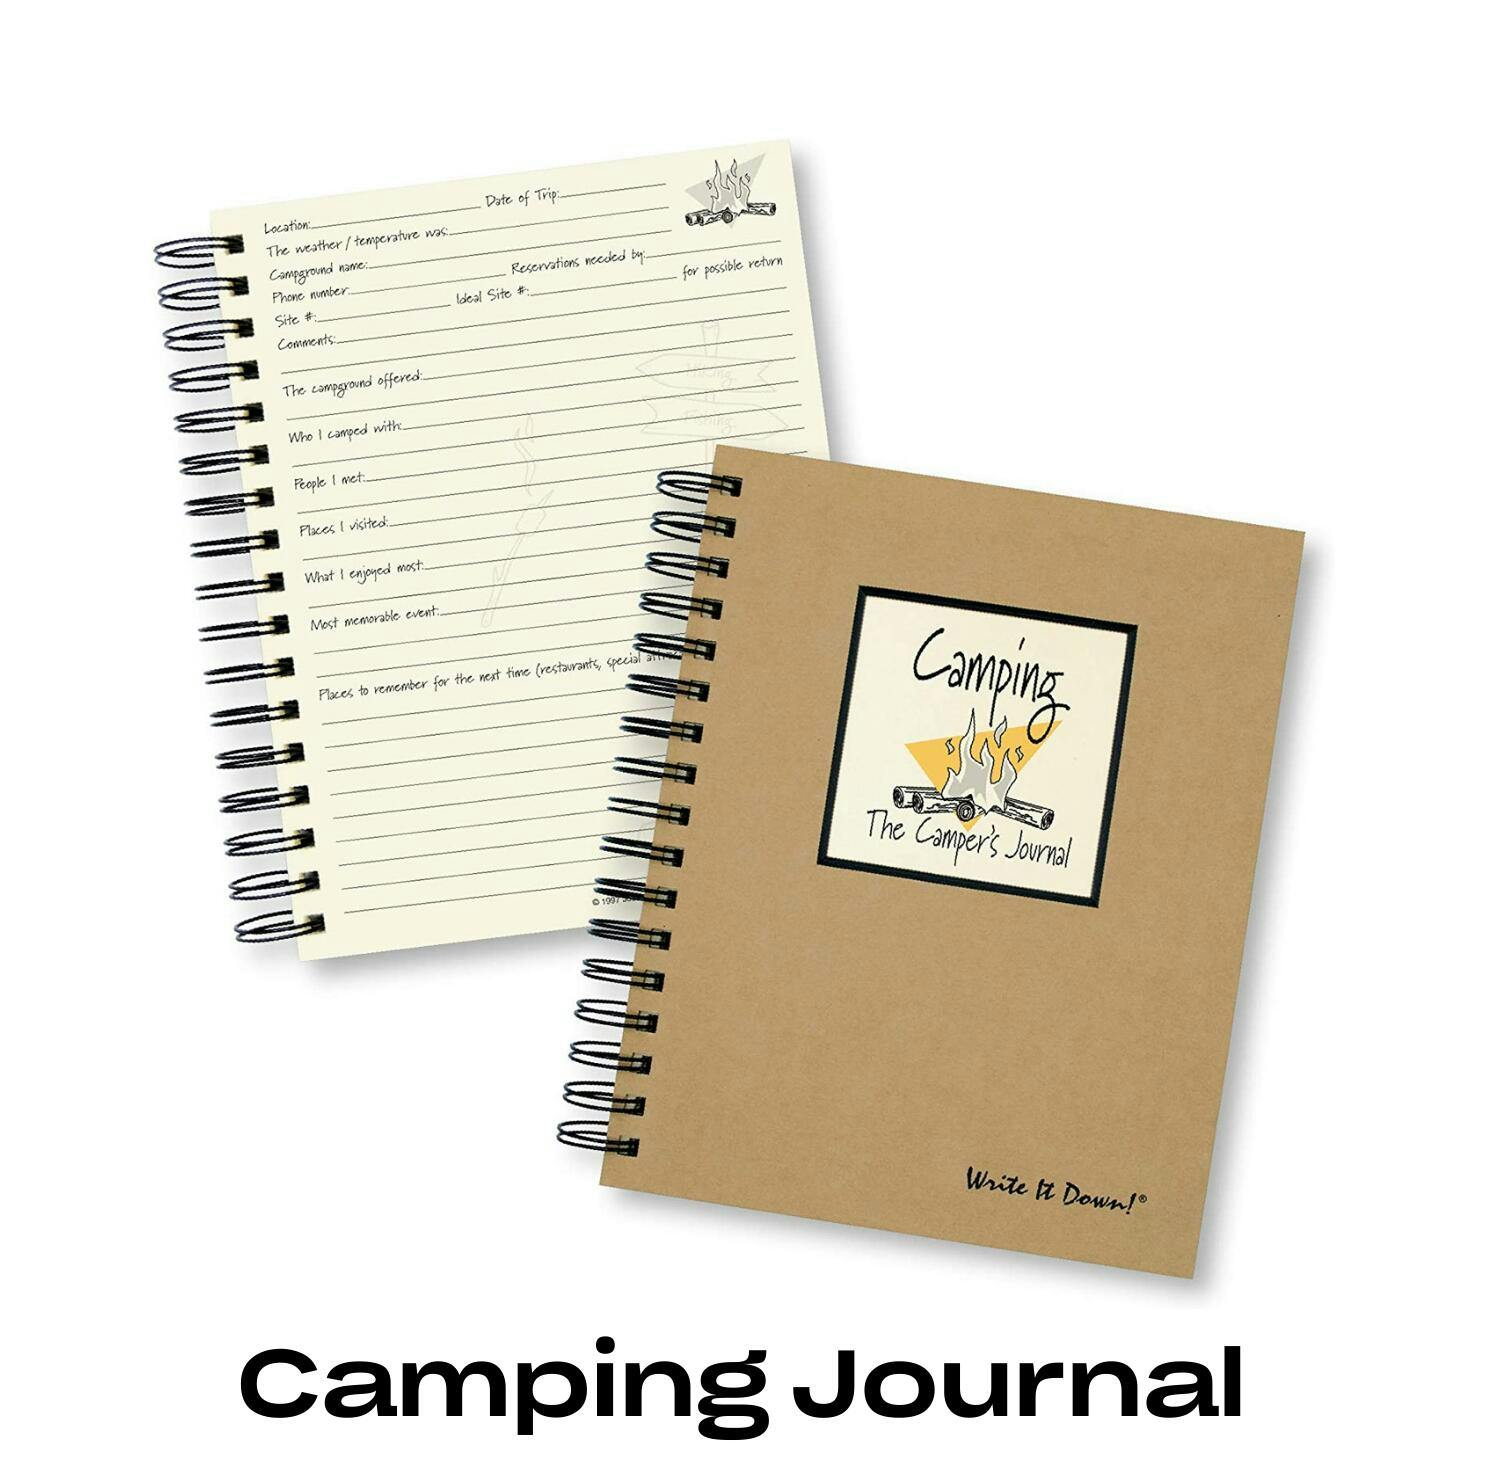 A spiral bound journal designed specifically for camping.